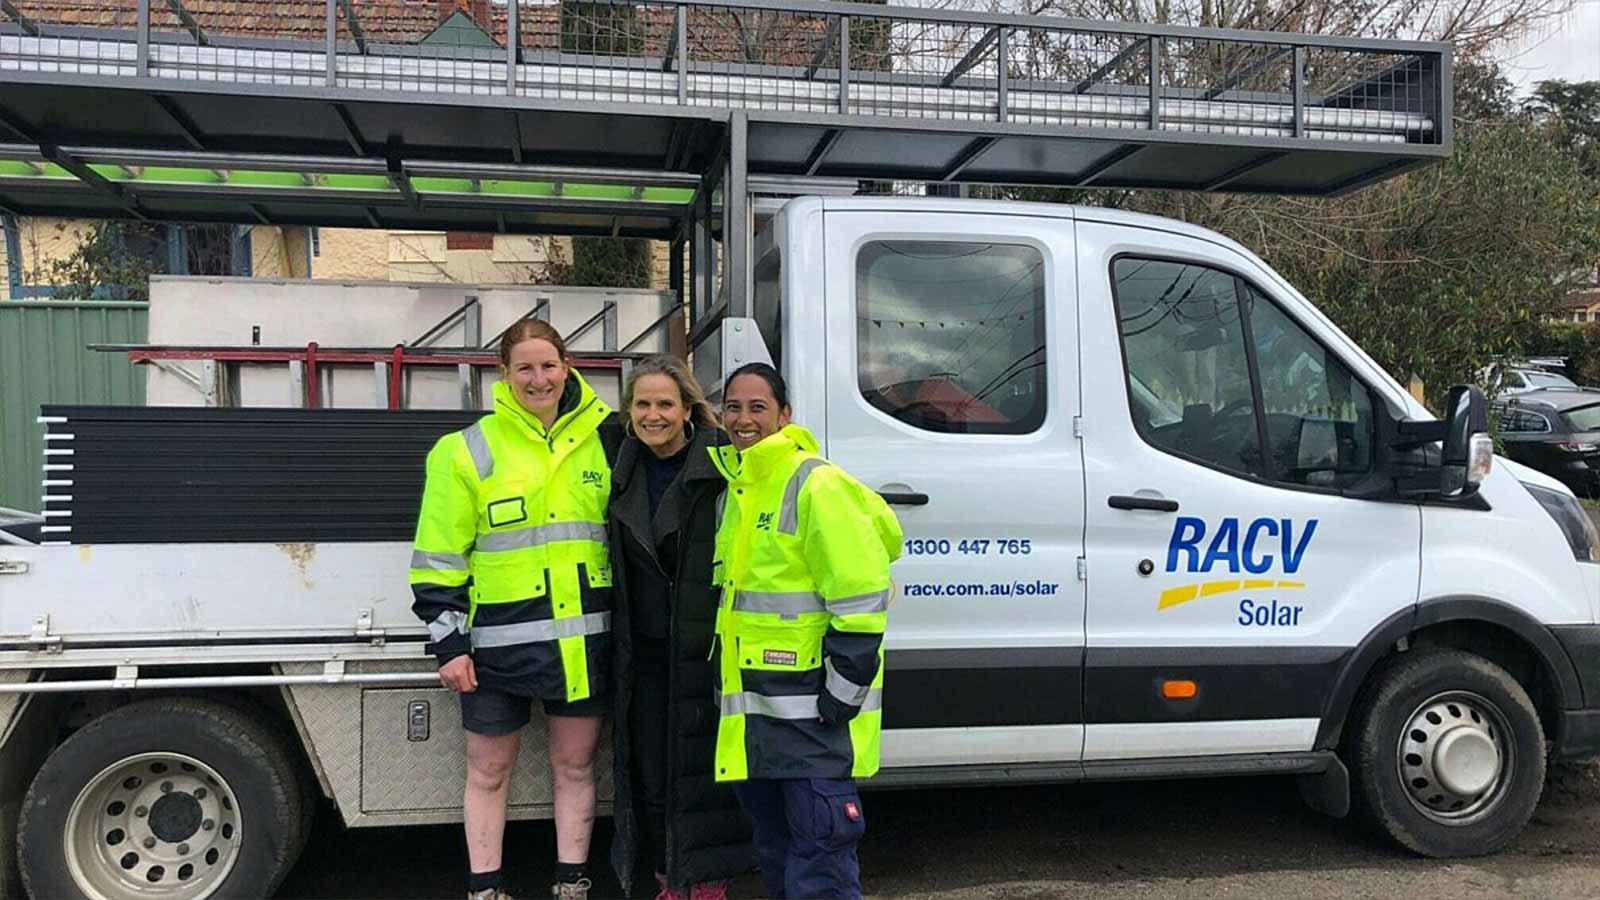 Mel, Tracey and Shaynna on set of Country Home Rescue, standing in front of a RACV Solar truck filled with solar panelling. 